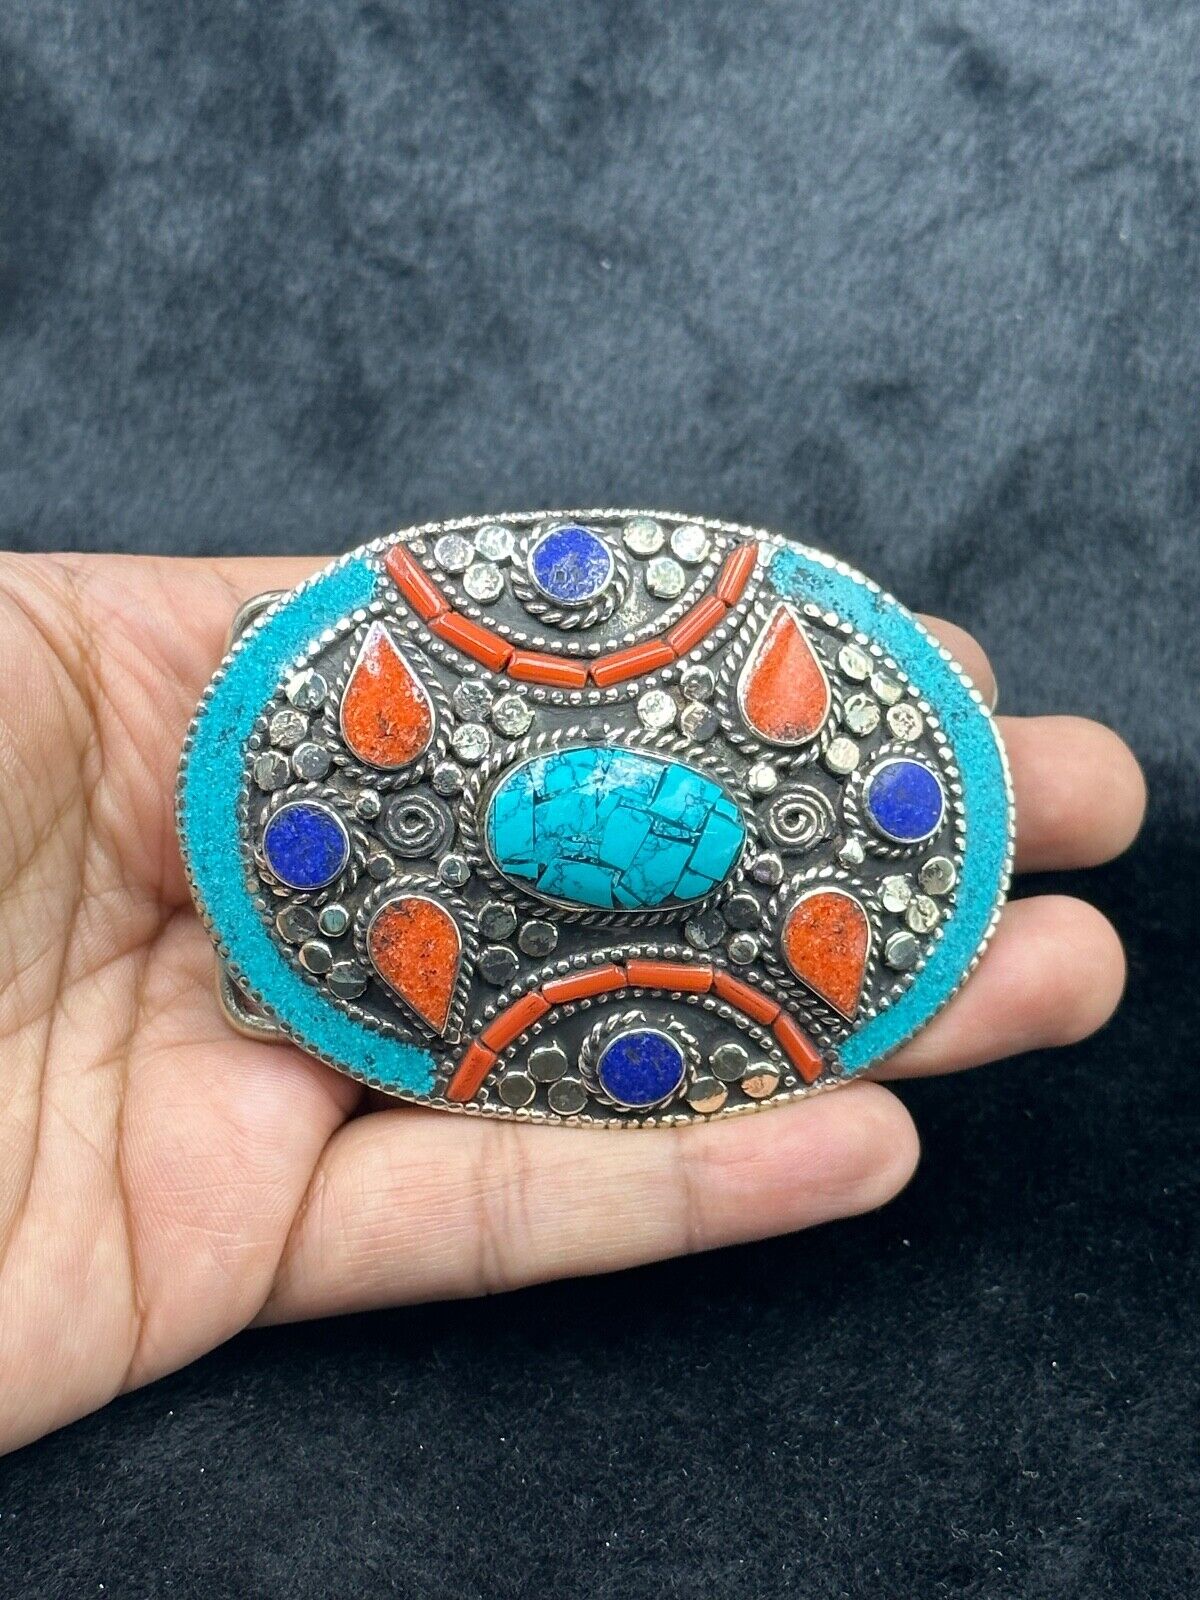 Wonderful Vintage Nepali Silver Belt Buckle With Turquoise Coral And Lapis Stone